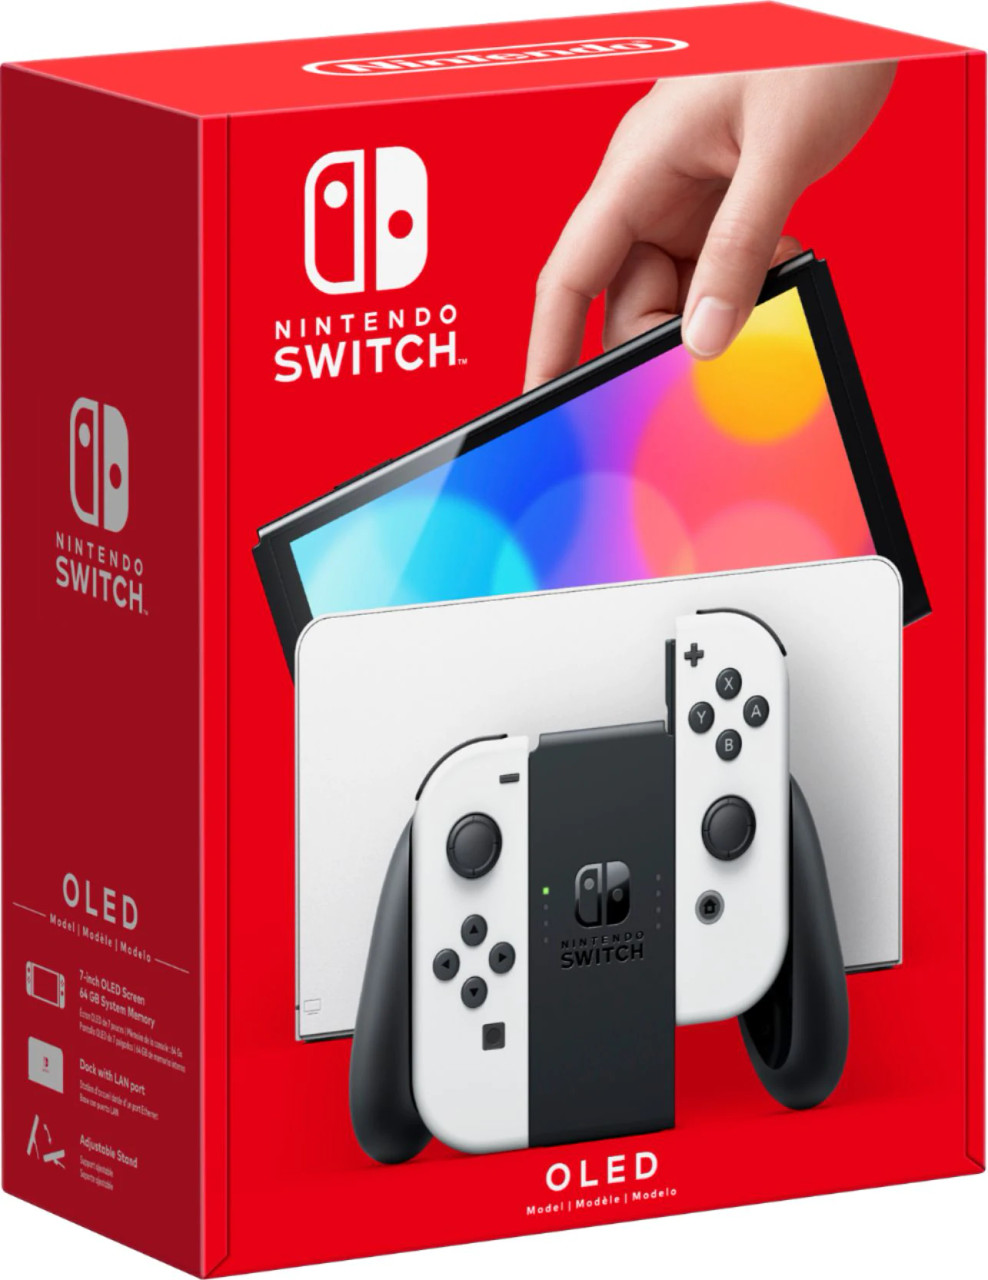 Nintendo Switch OLED Model Best At Price Buy | Mojo | Online Computers